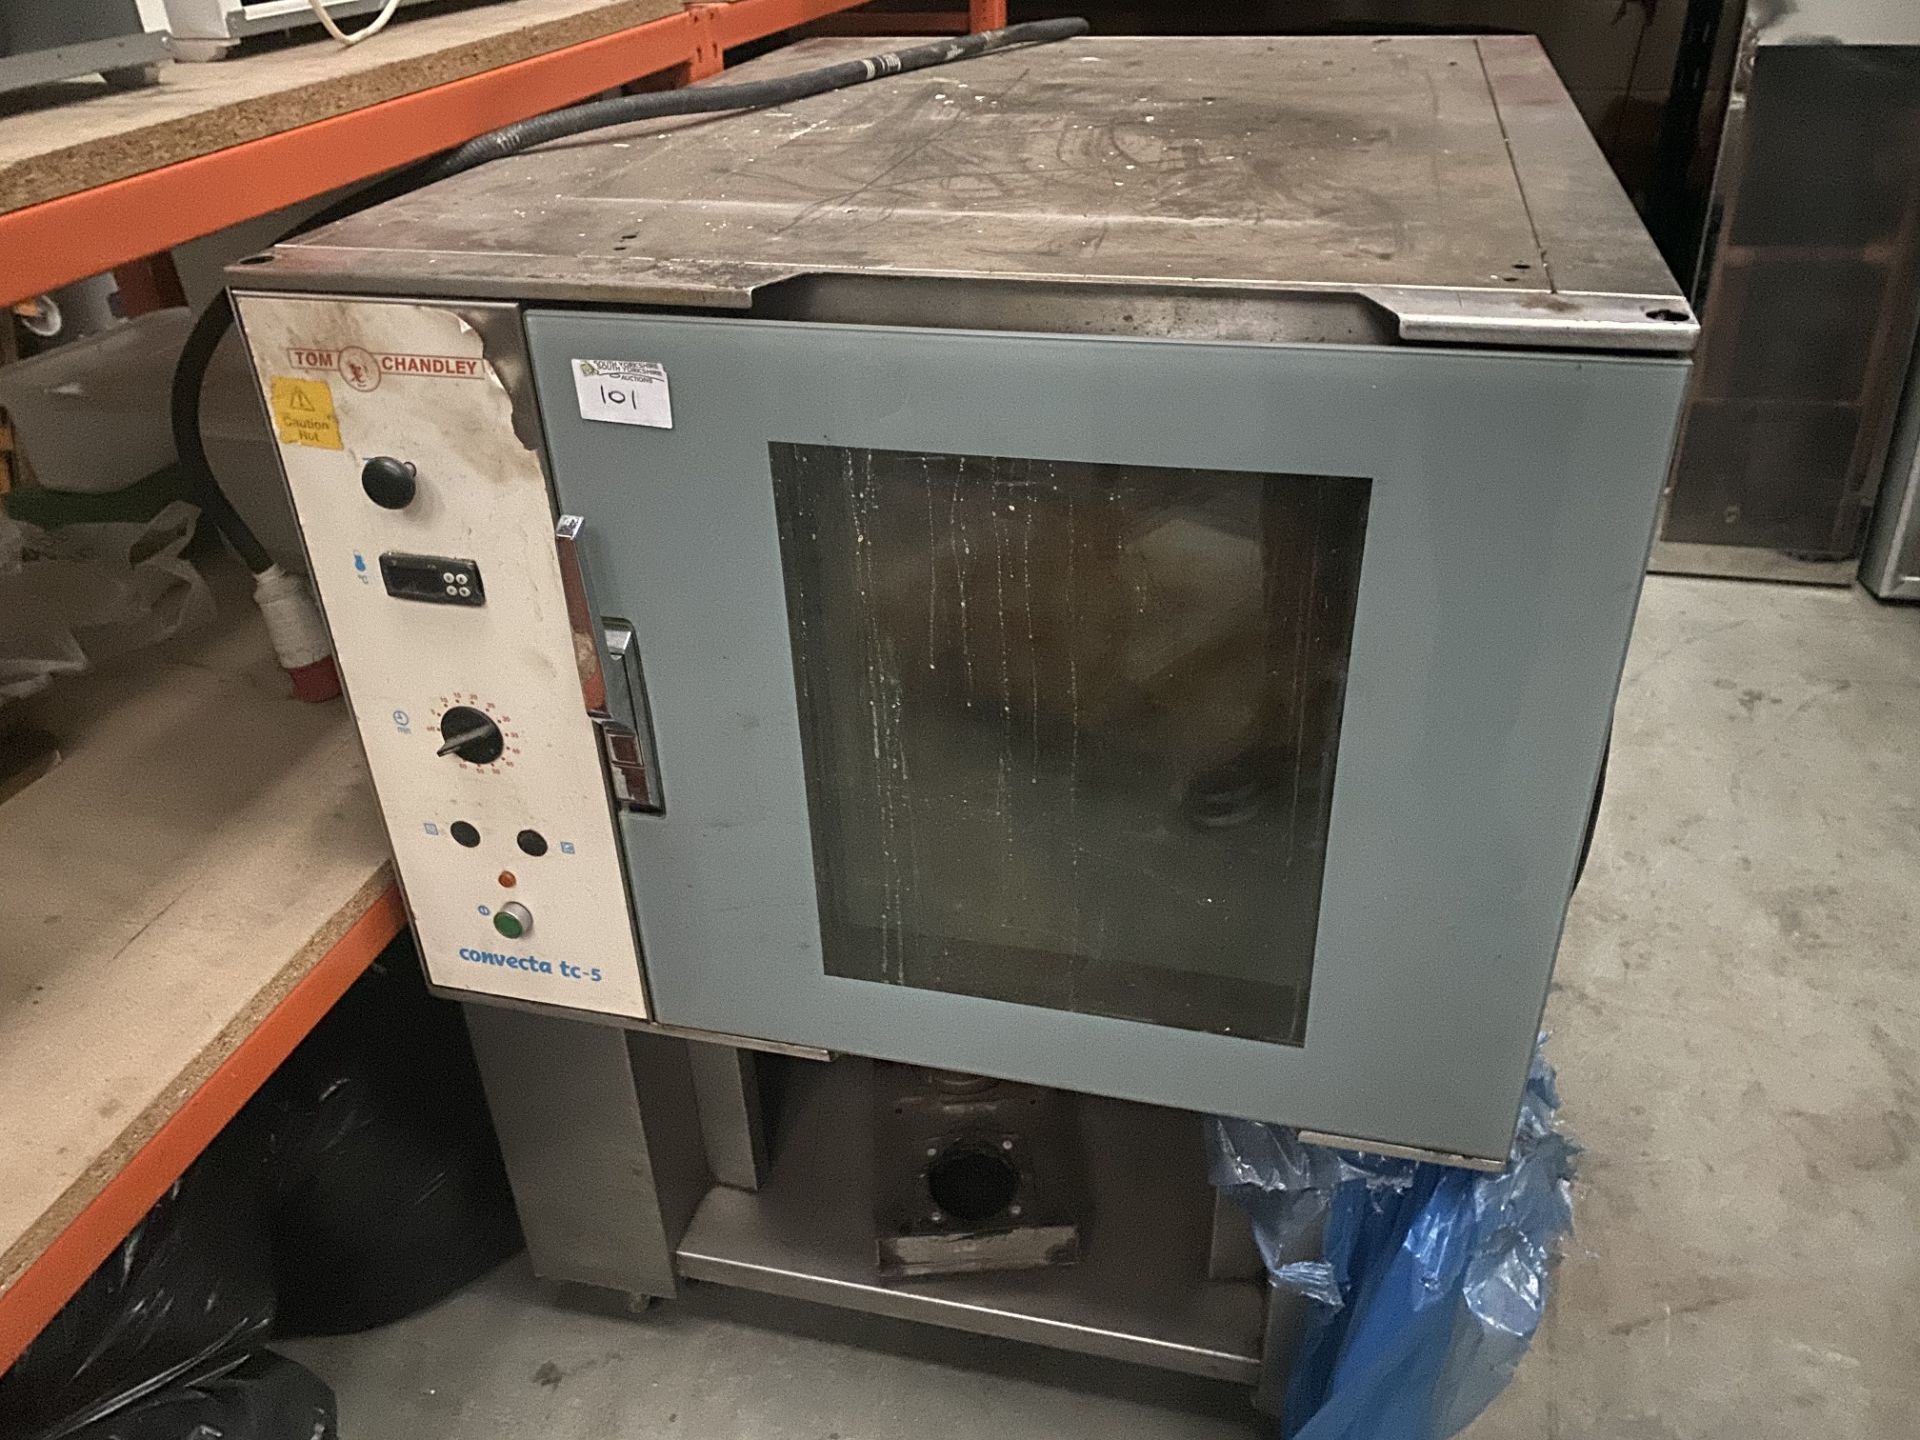 Tom Chandley 3 Phase Electric Bakers Oven